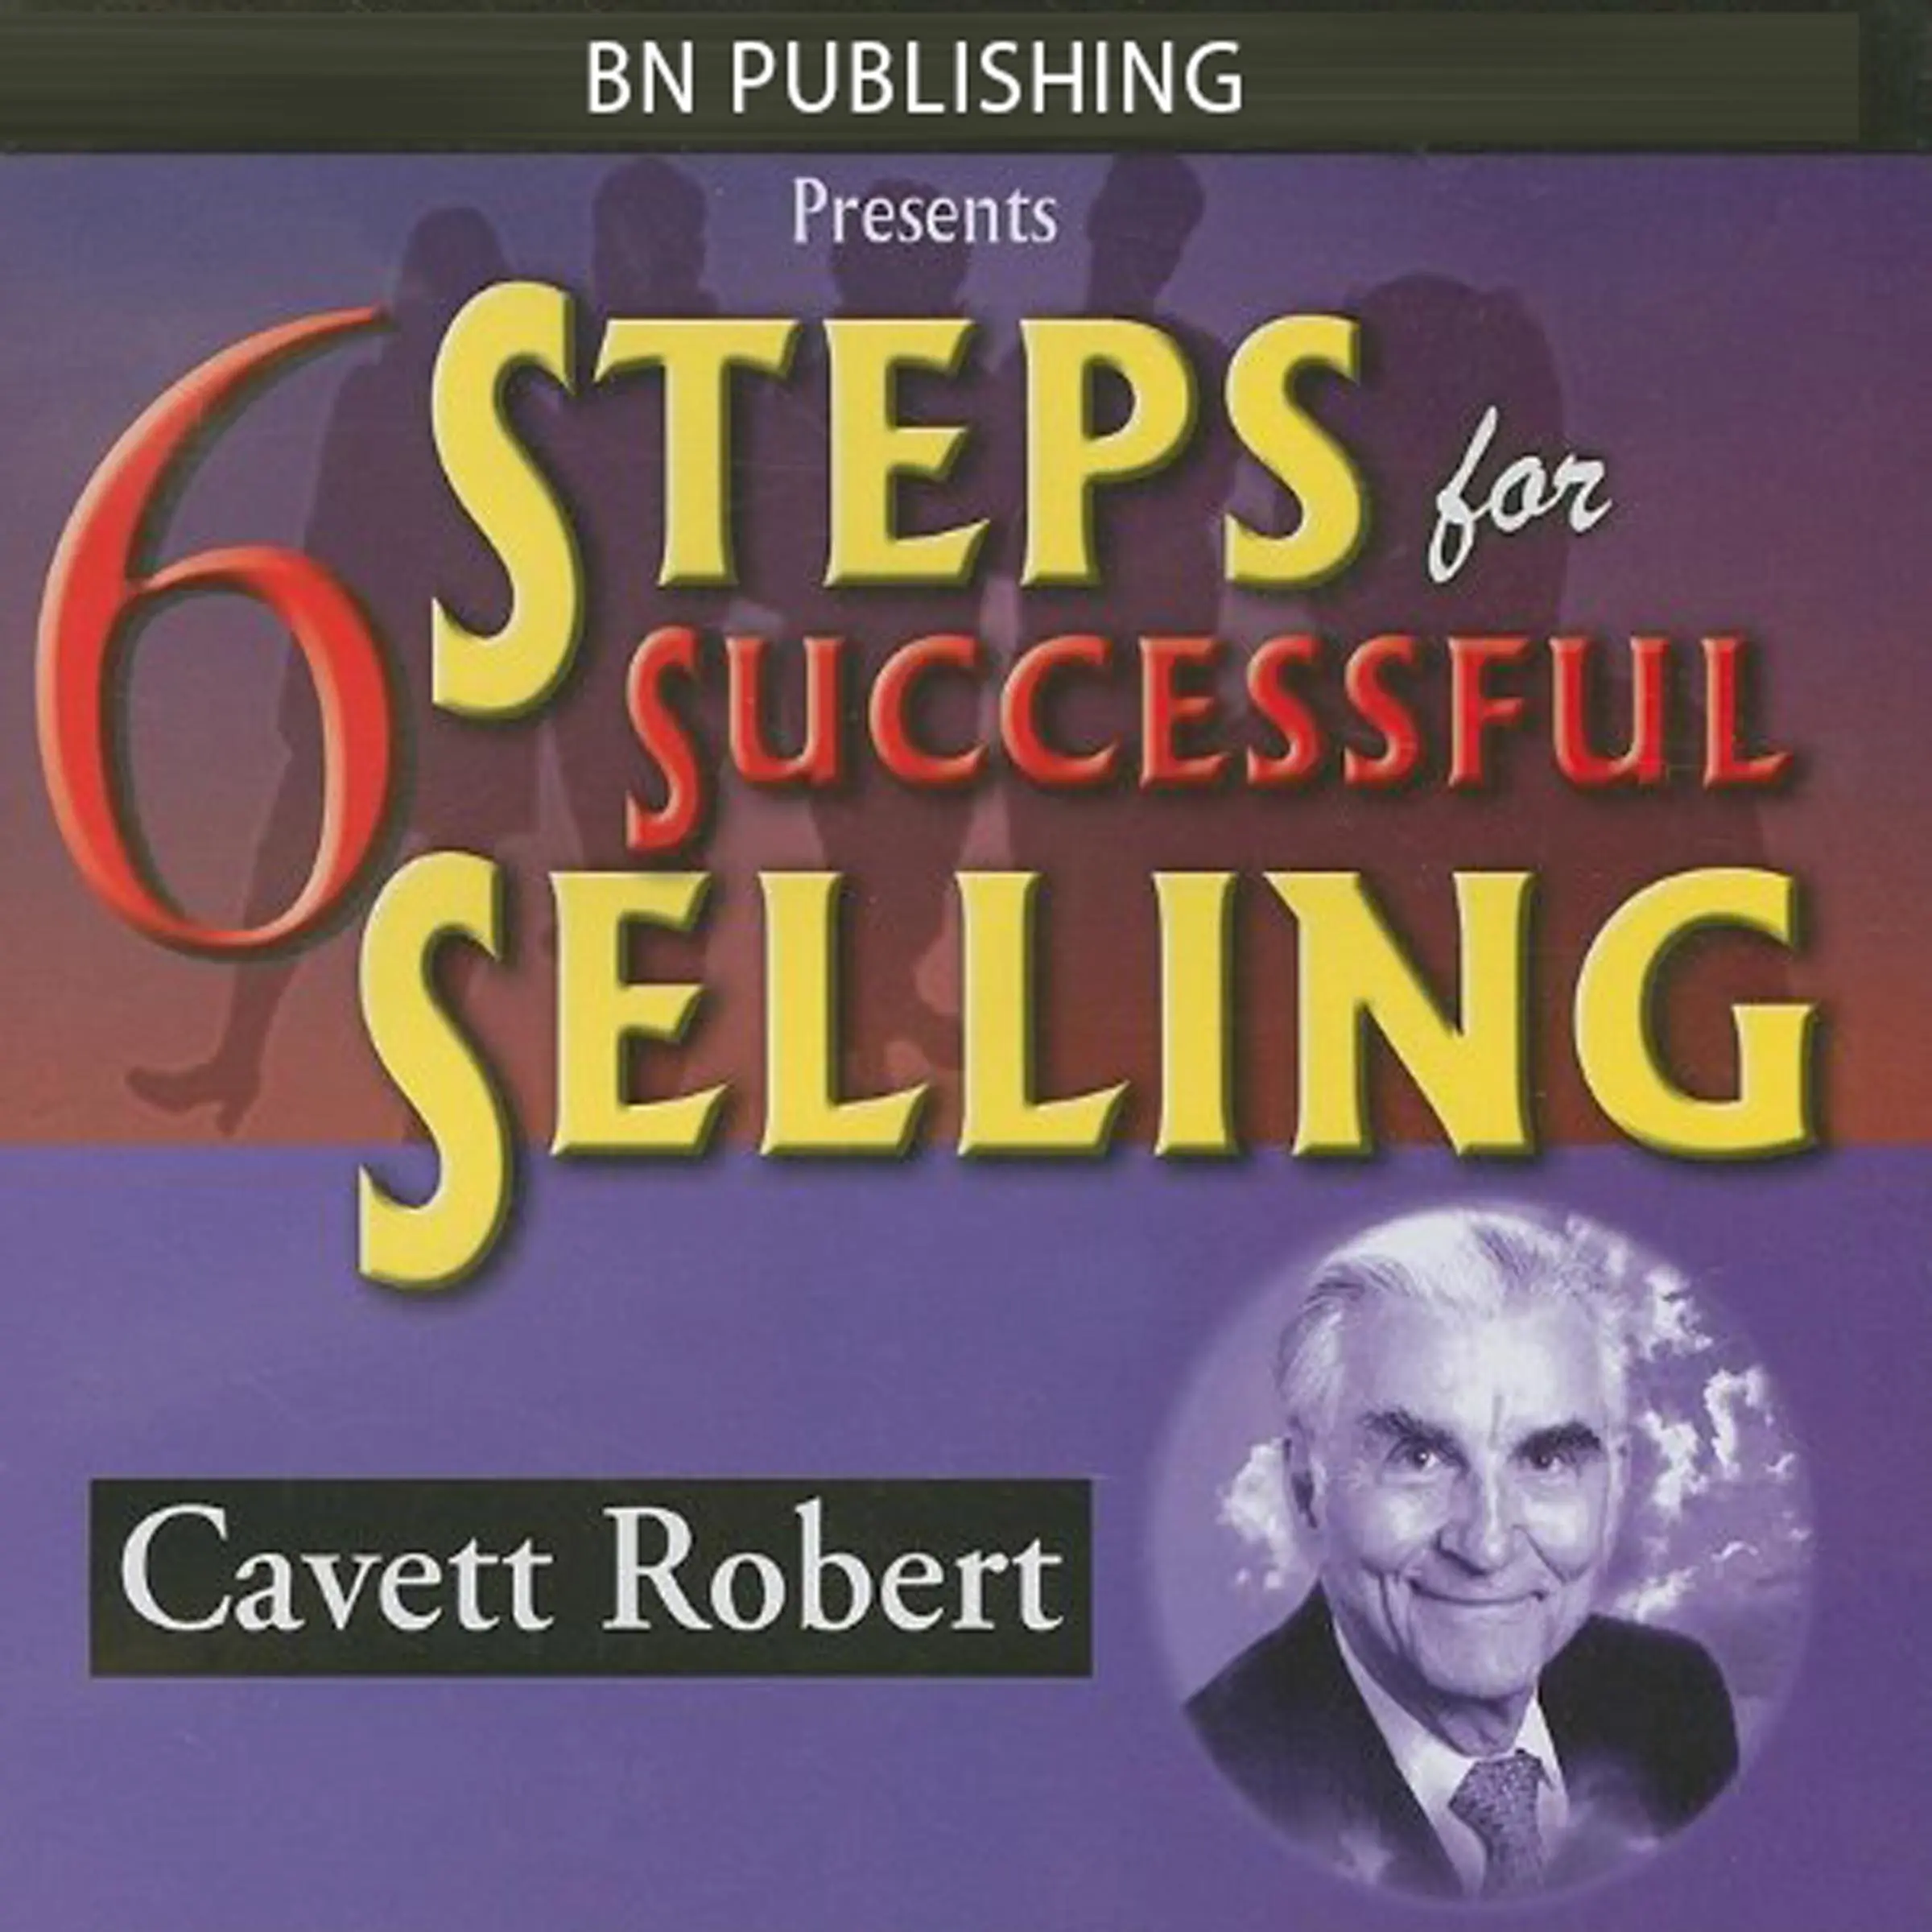 6 Steps for Successful Selling Audiobook by Cavett Robert